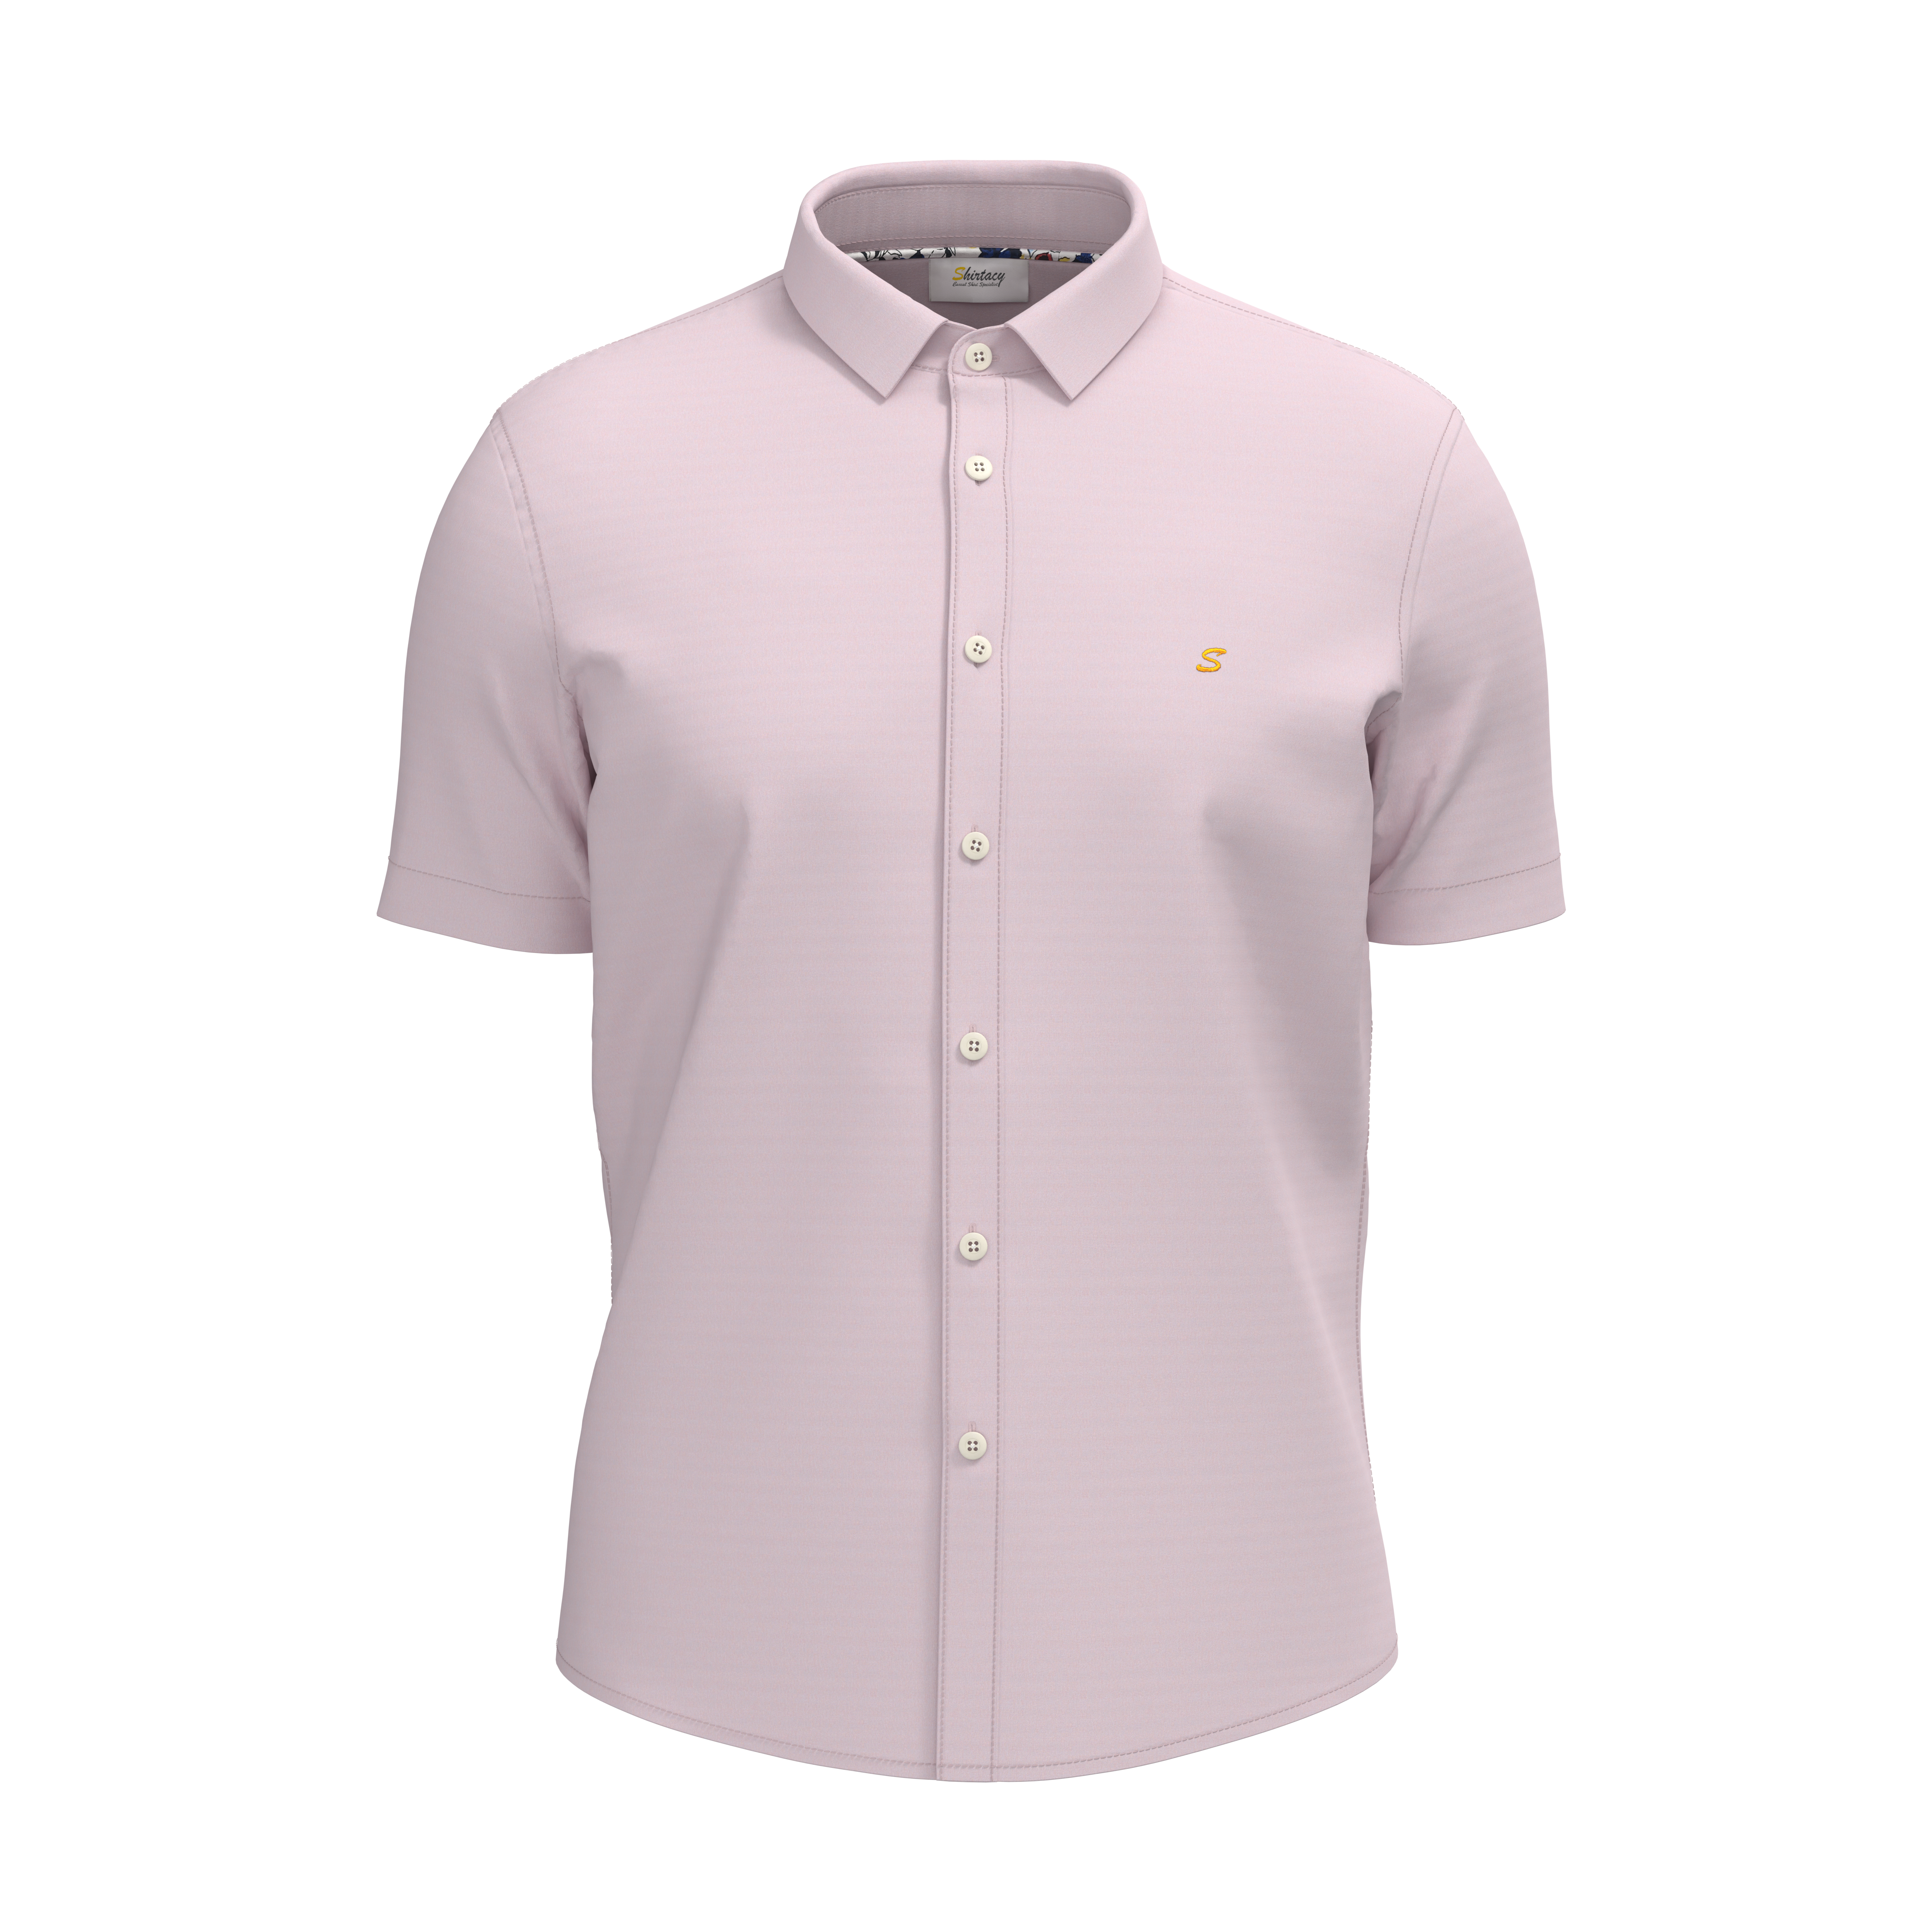 Classic Textured Cotton Oxford Short Sleeves Shirt - Pink